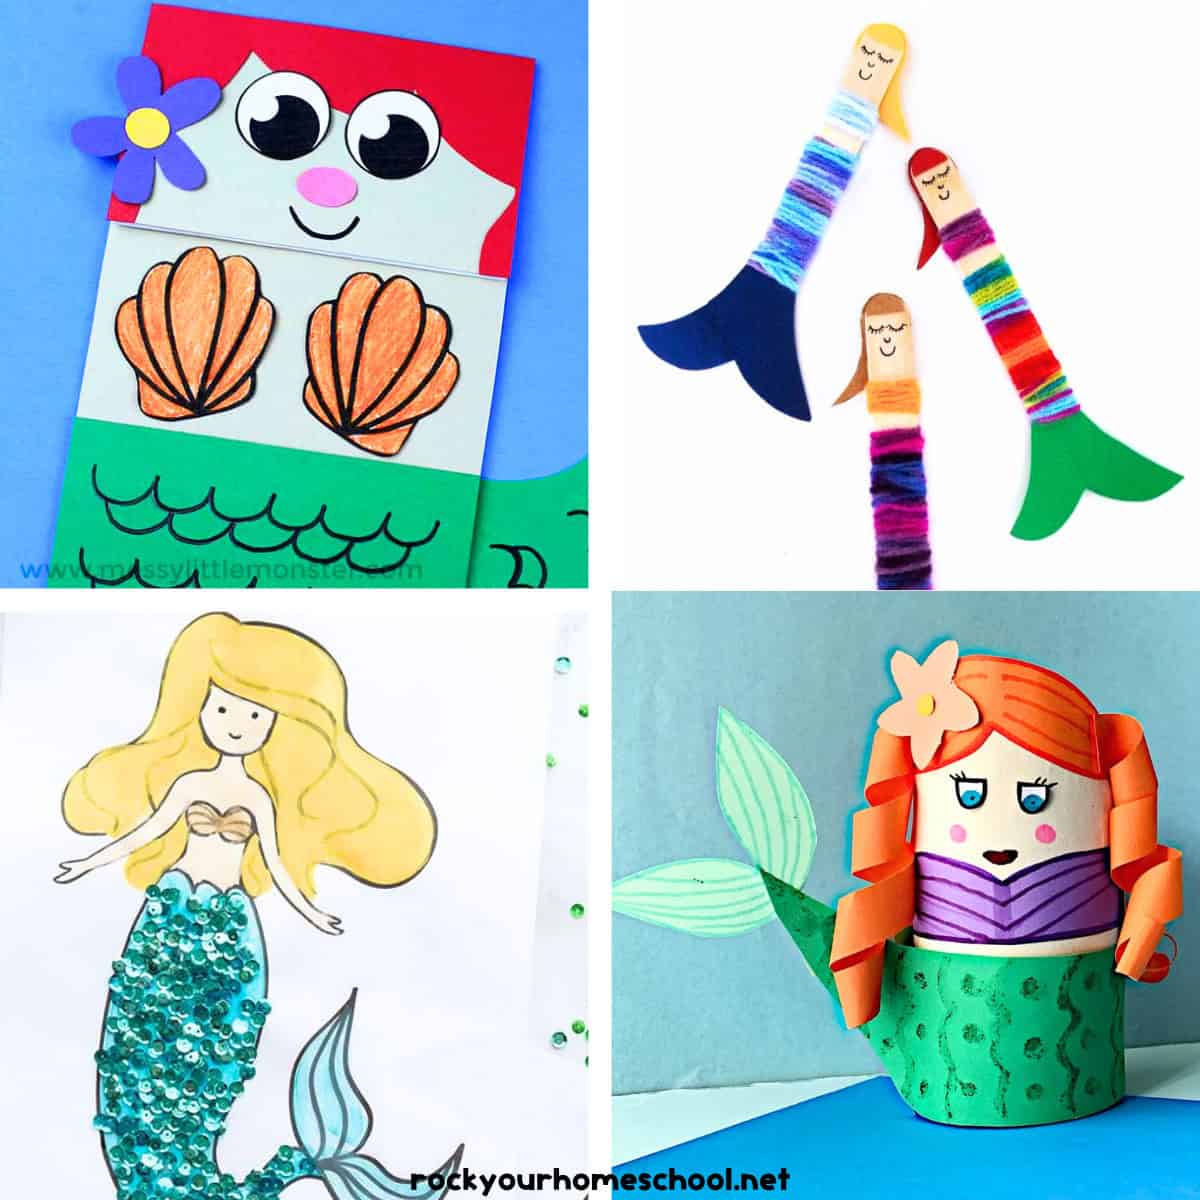 Four examples of mermaid crafts for kids.